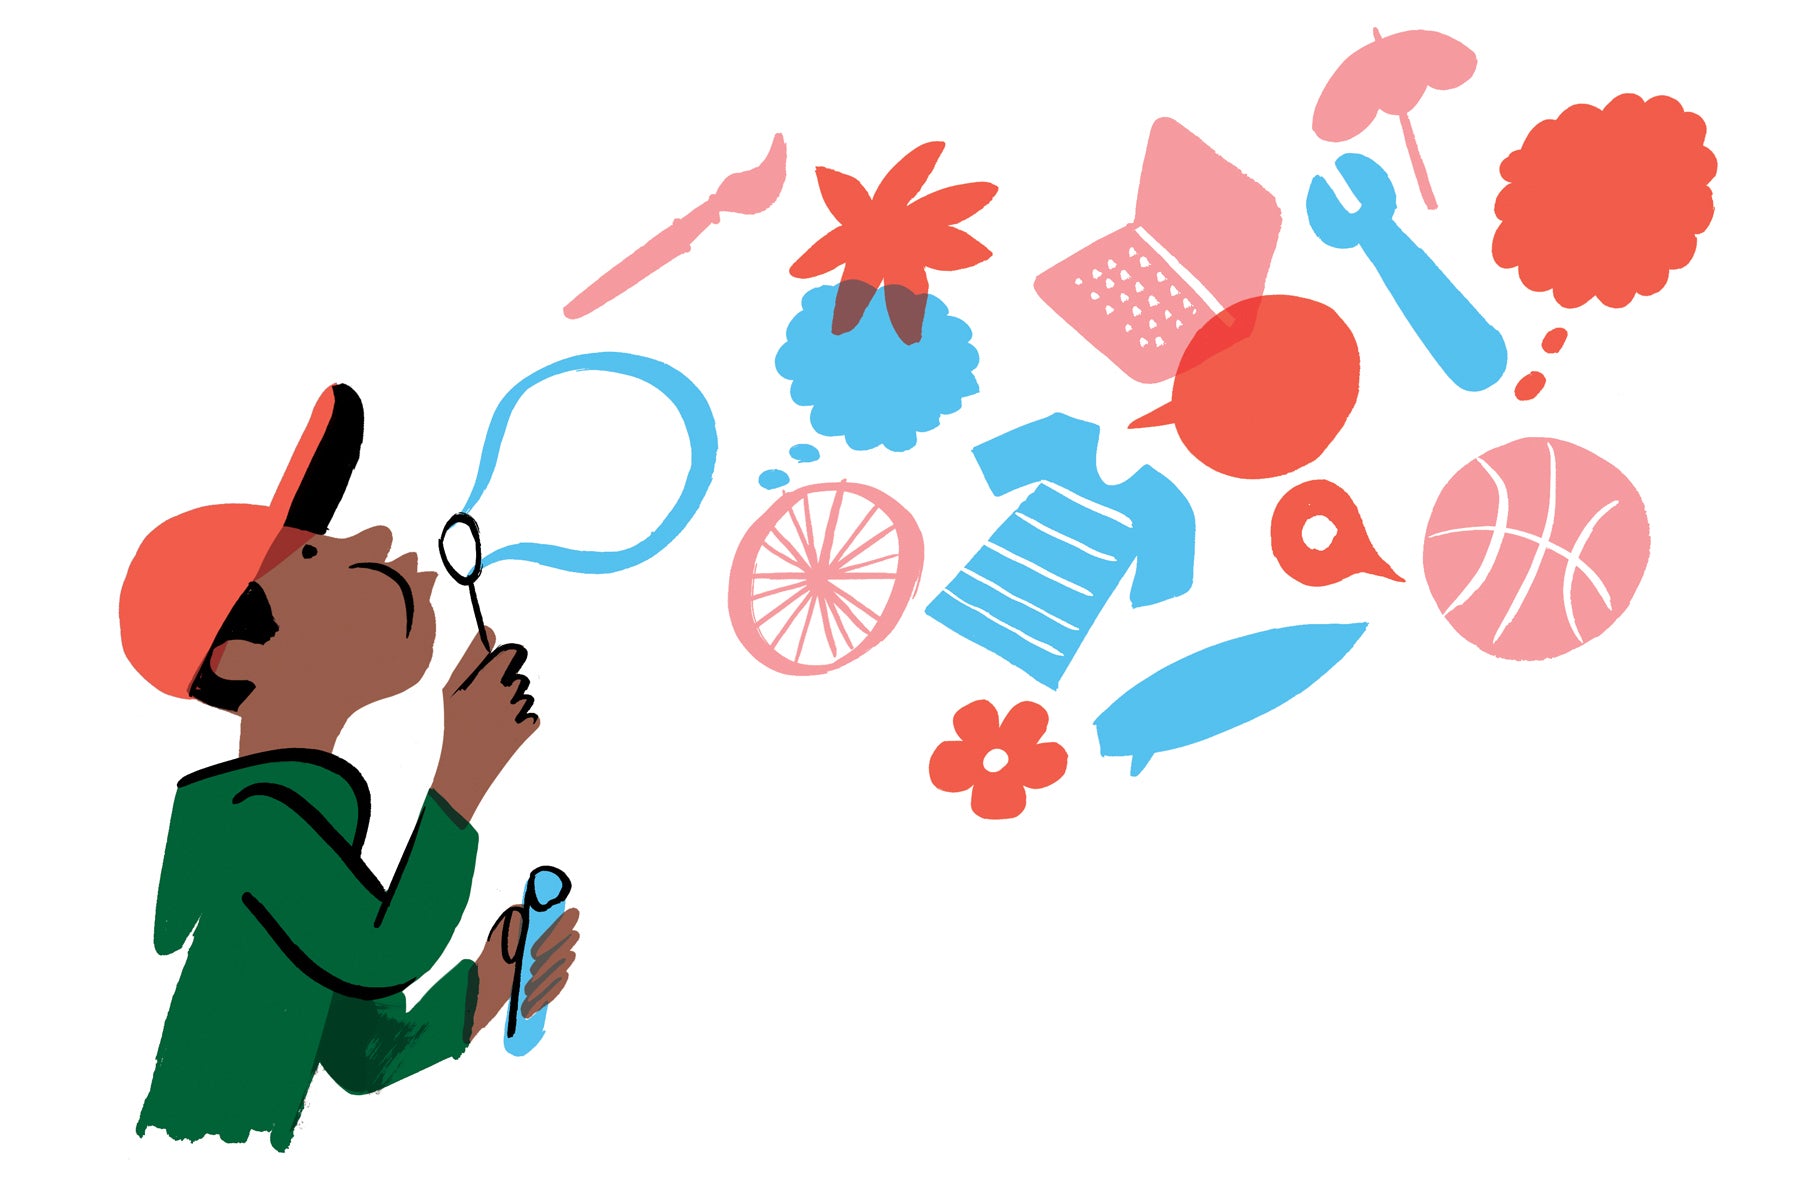 Illustration of a young black boy with a green sweatshirt and red baseball cap, blowing bubbles out of a wand. The bubbles are forming shapes that represent his business but also his hobbies and future goals.